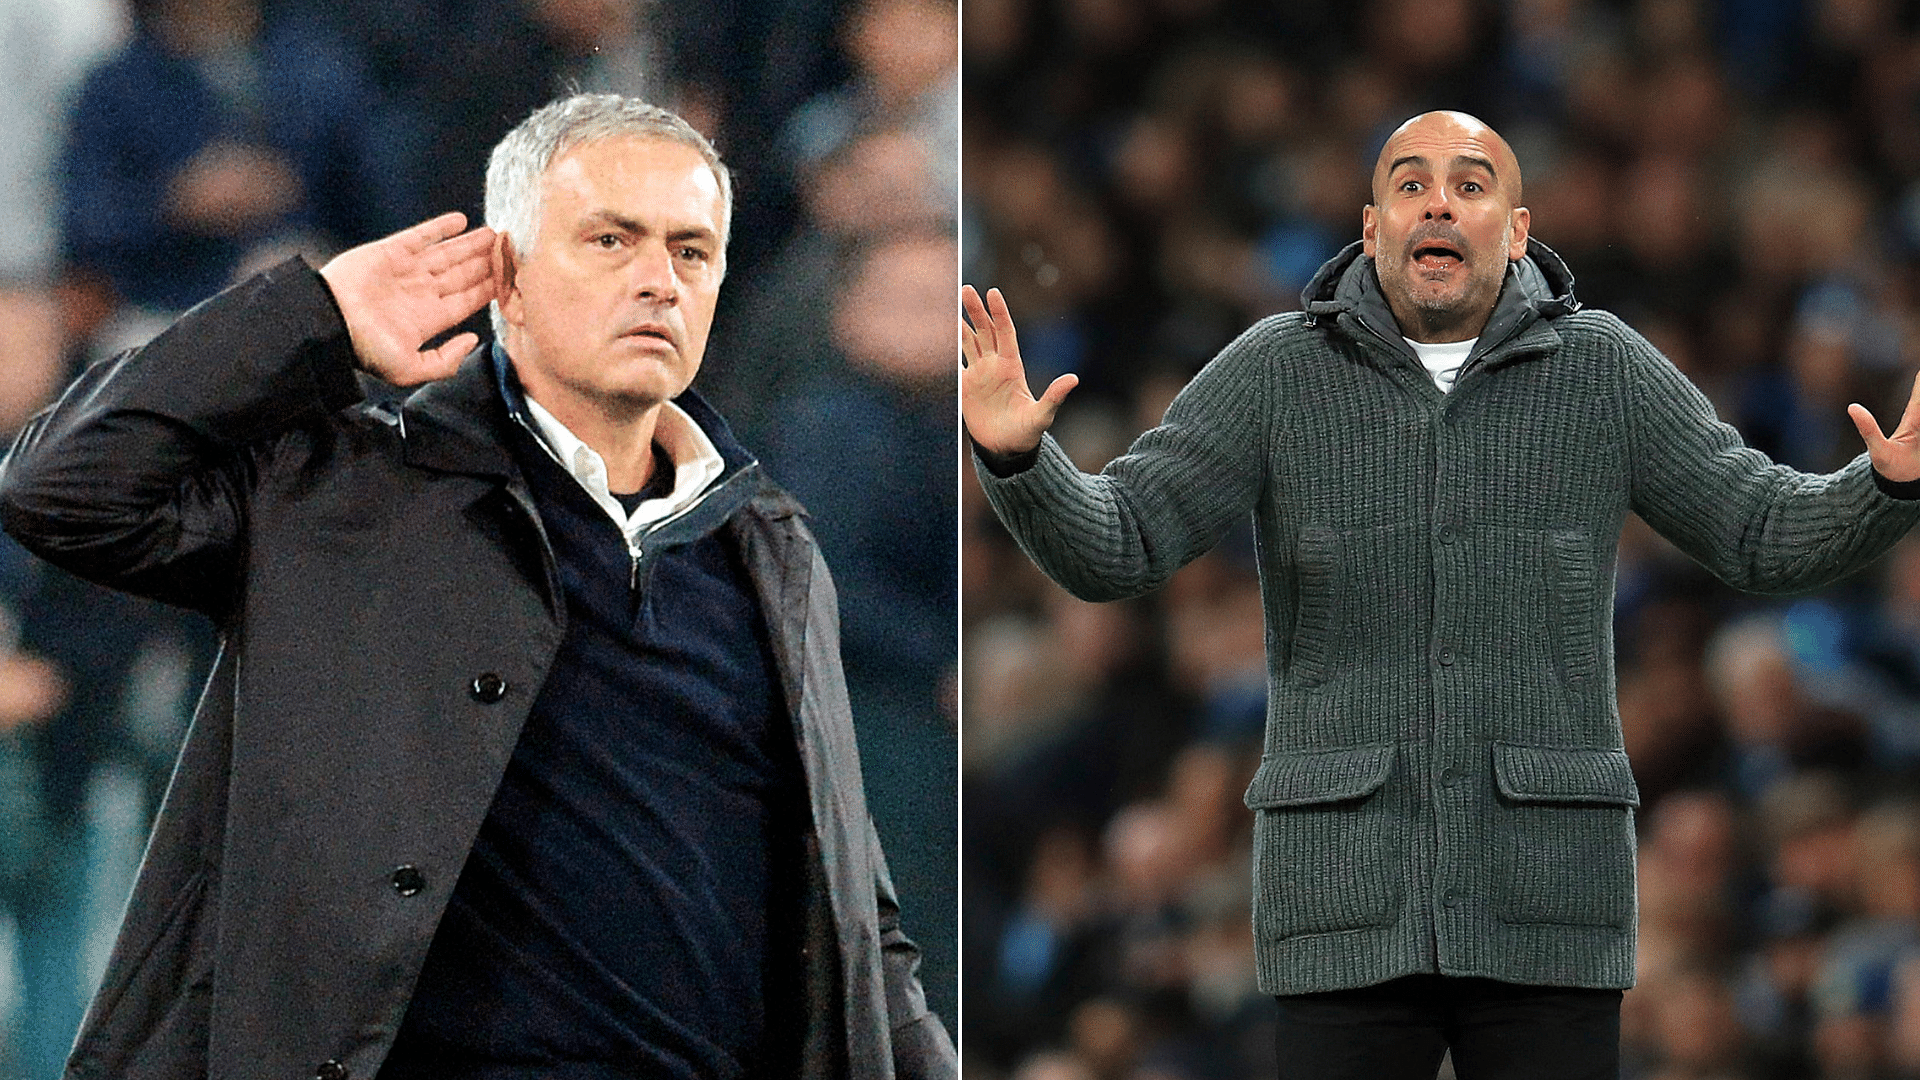 Mourinho has pipped Guardiola only five times in 21 matches between teams managed by the two